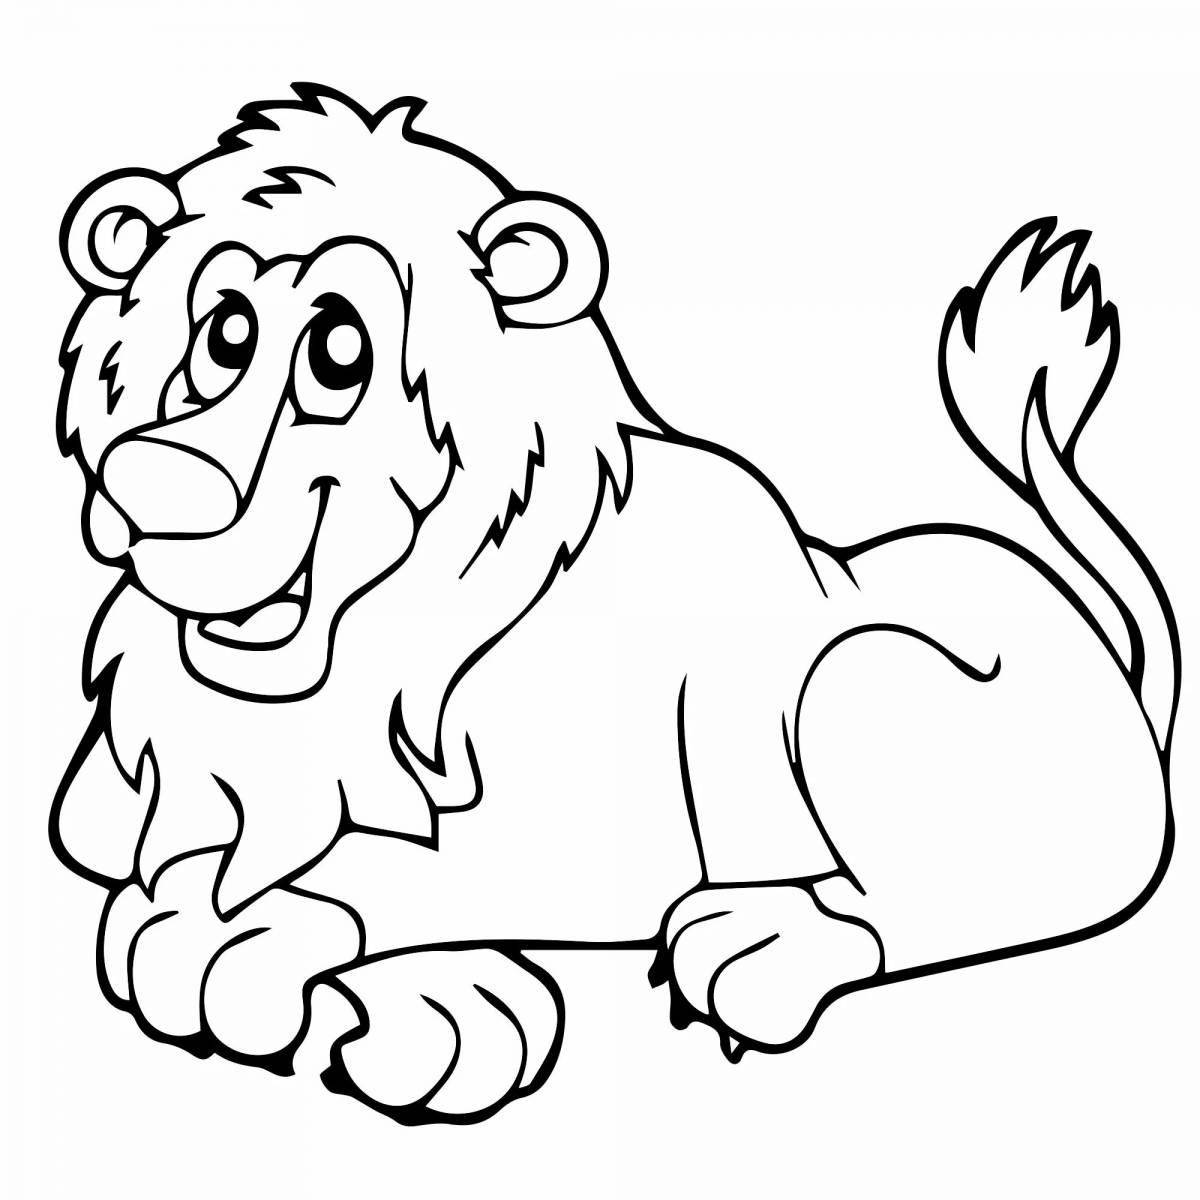 Awesome lion coloring page for kids